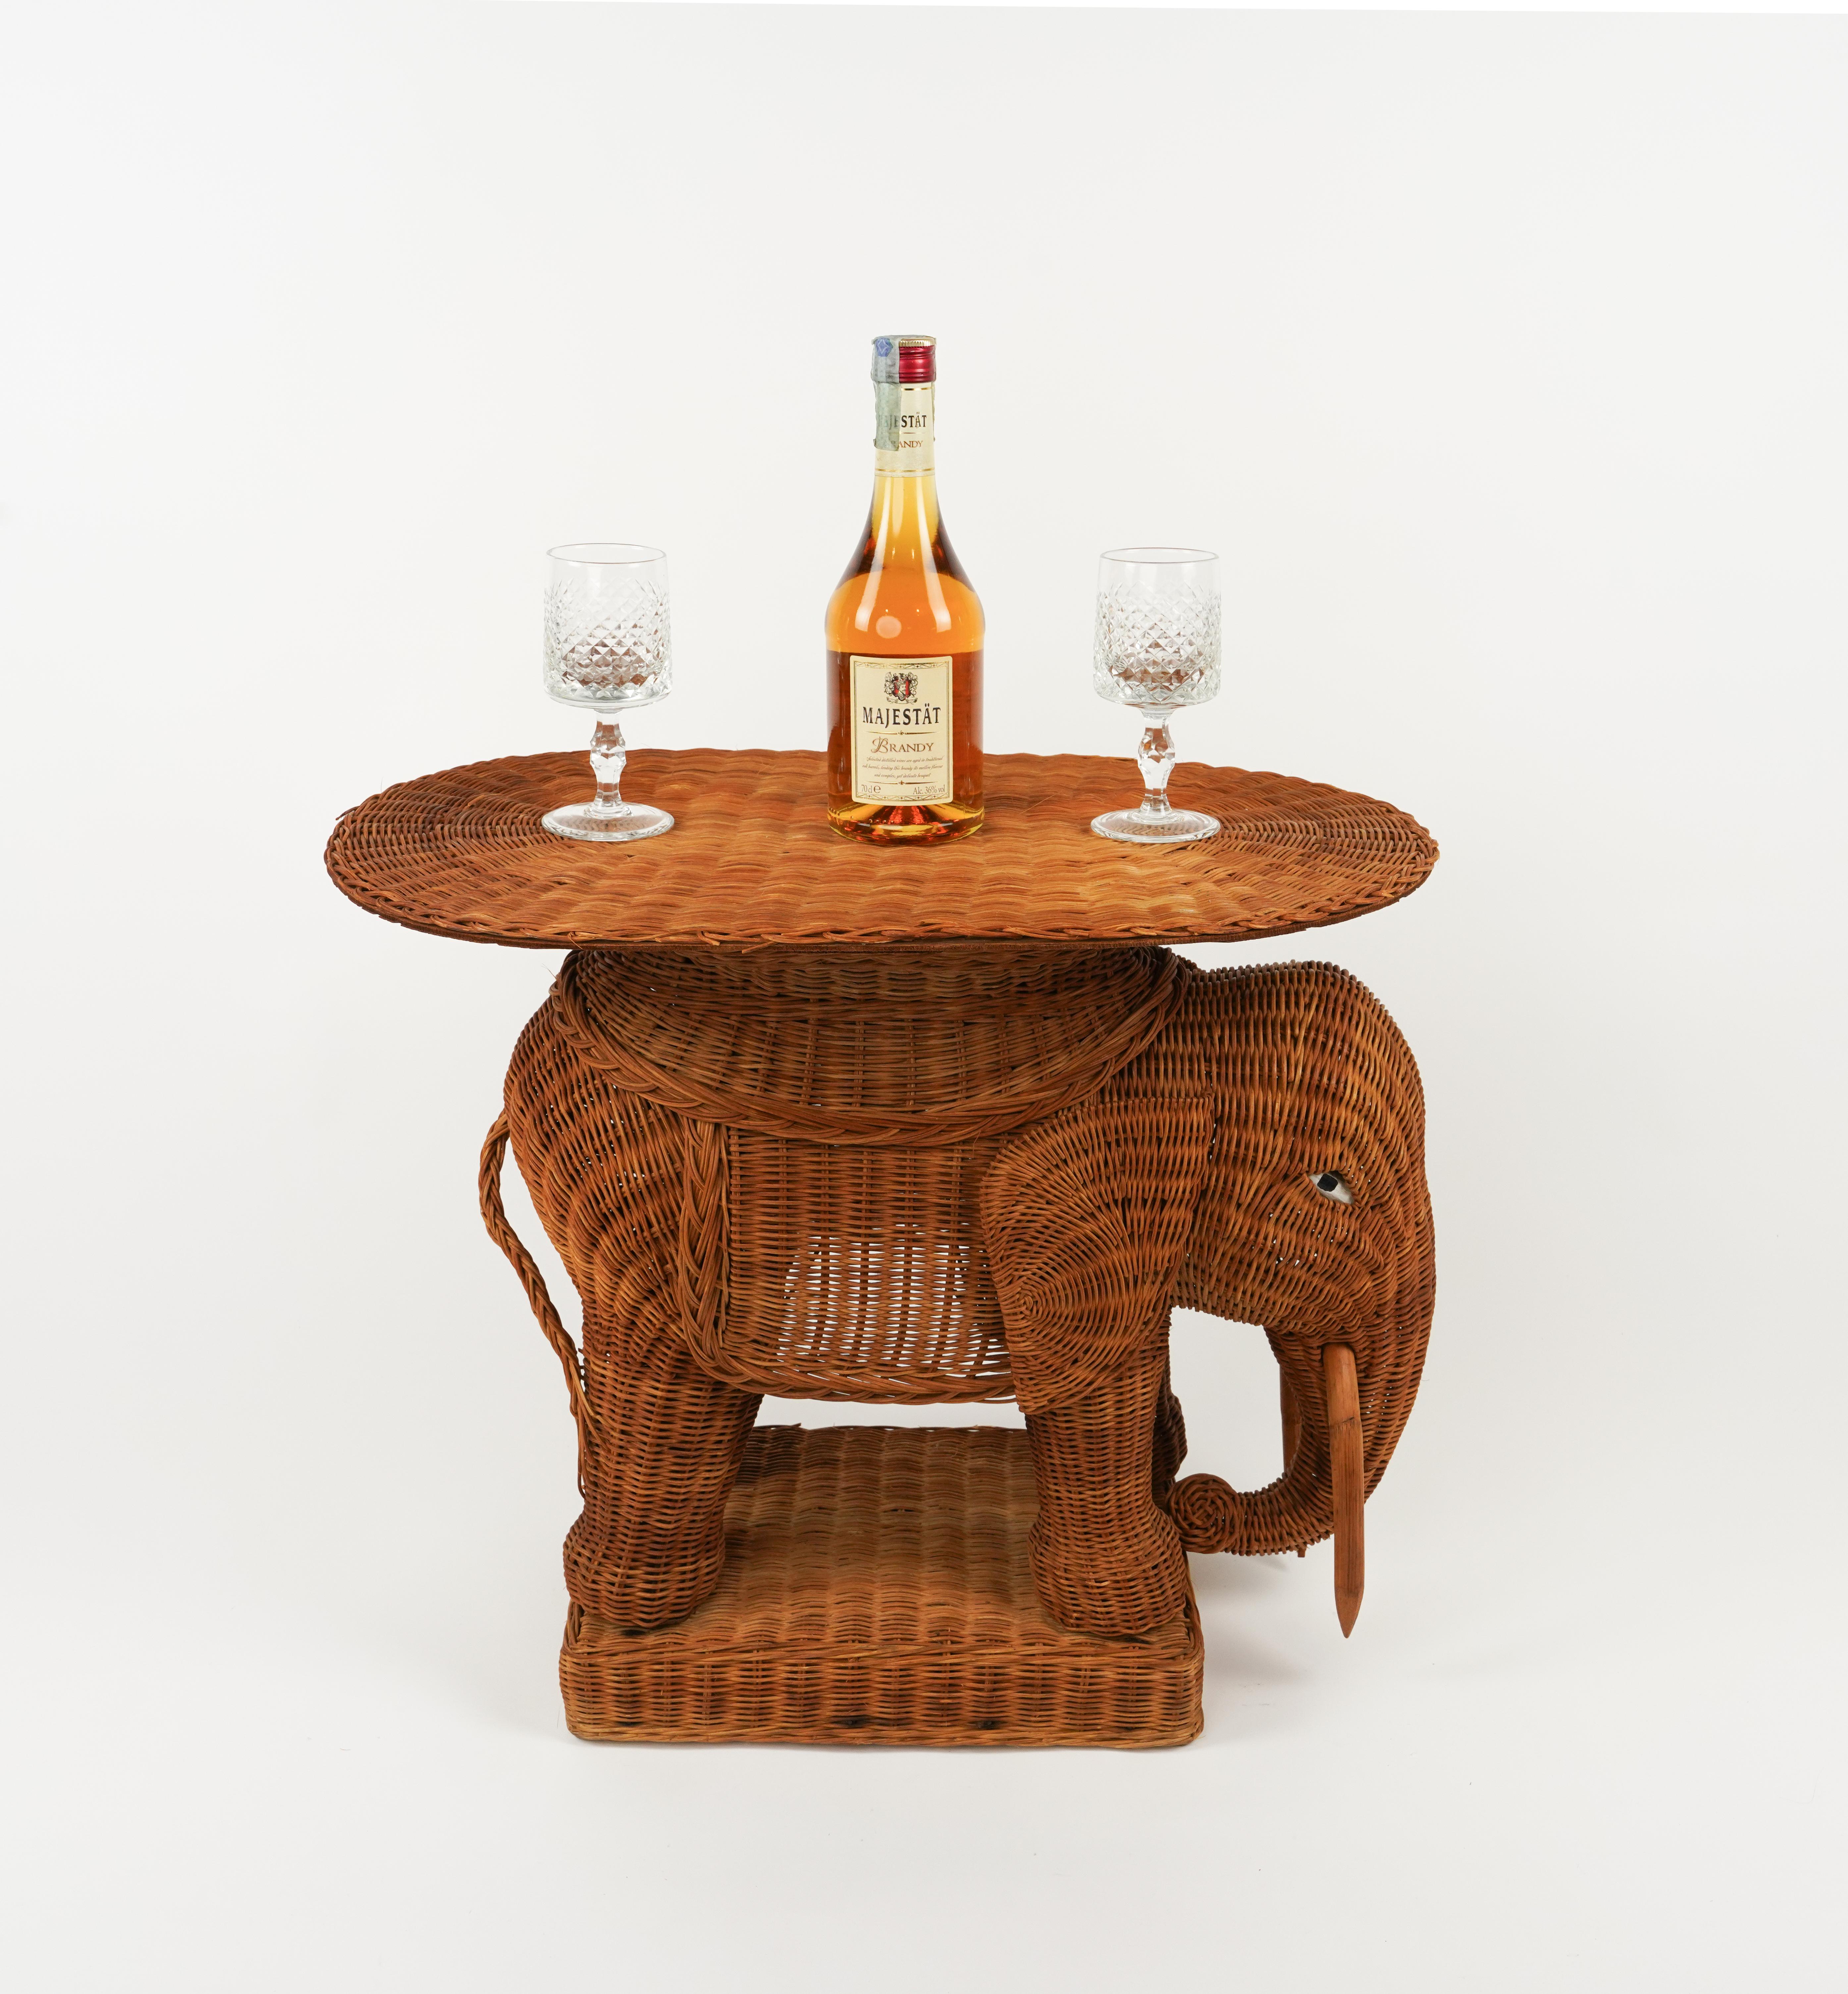 Mid-20th Century Rattan and Wicker Elephant Side Coffee Table Vivai Del Sud Style, Italy, 1960s For Sale